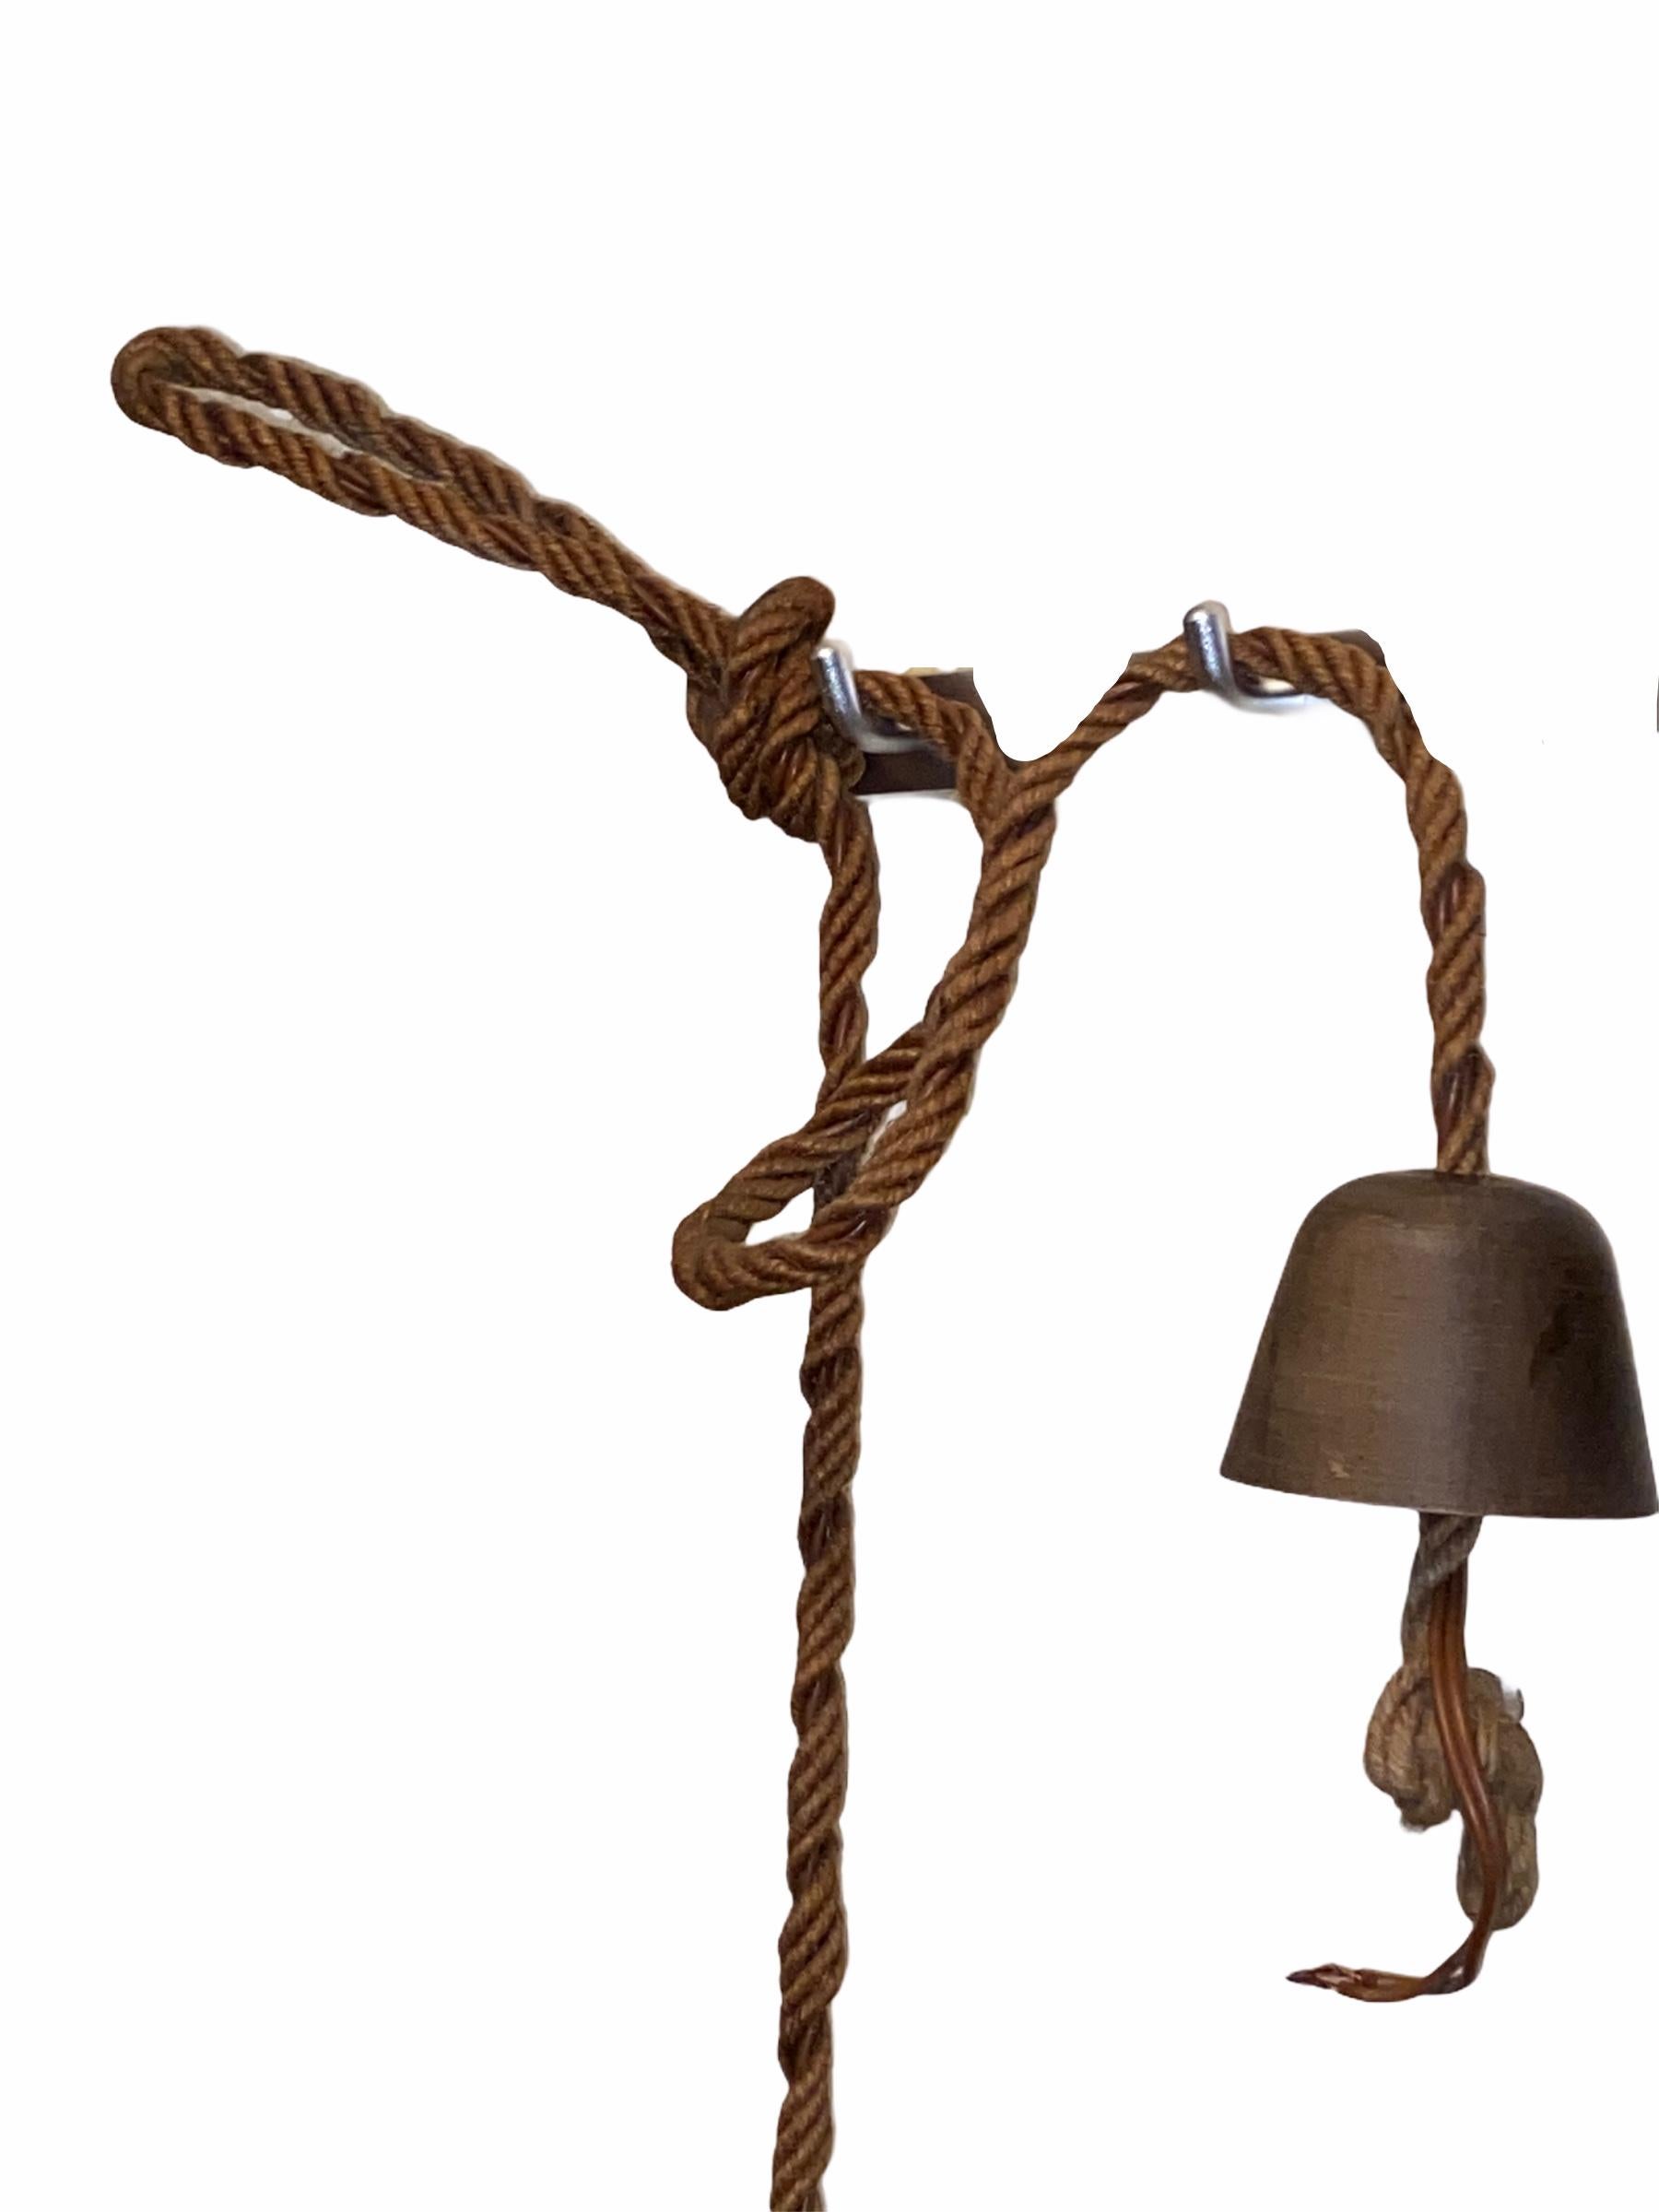 20th Century Vintage Hand Carved Mountain Climber or Mountaineer Pendant Light with Lantern